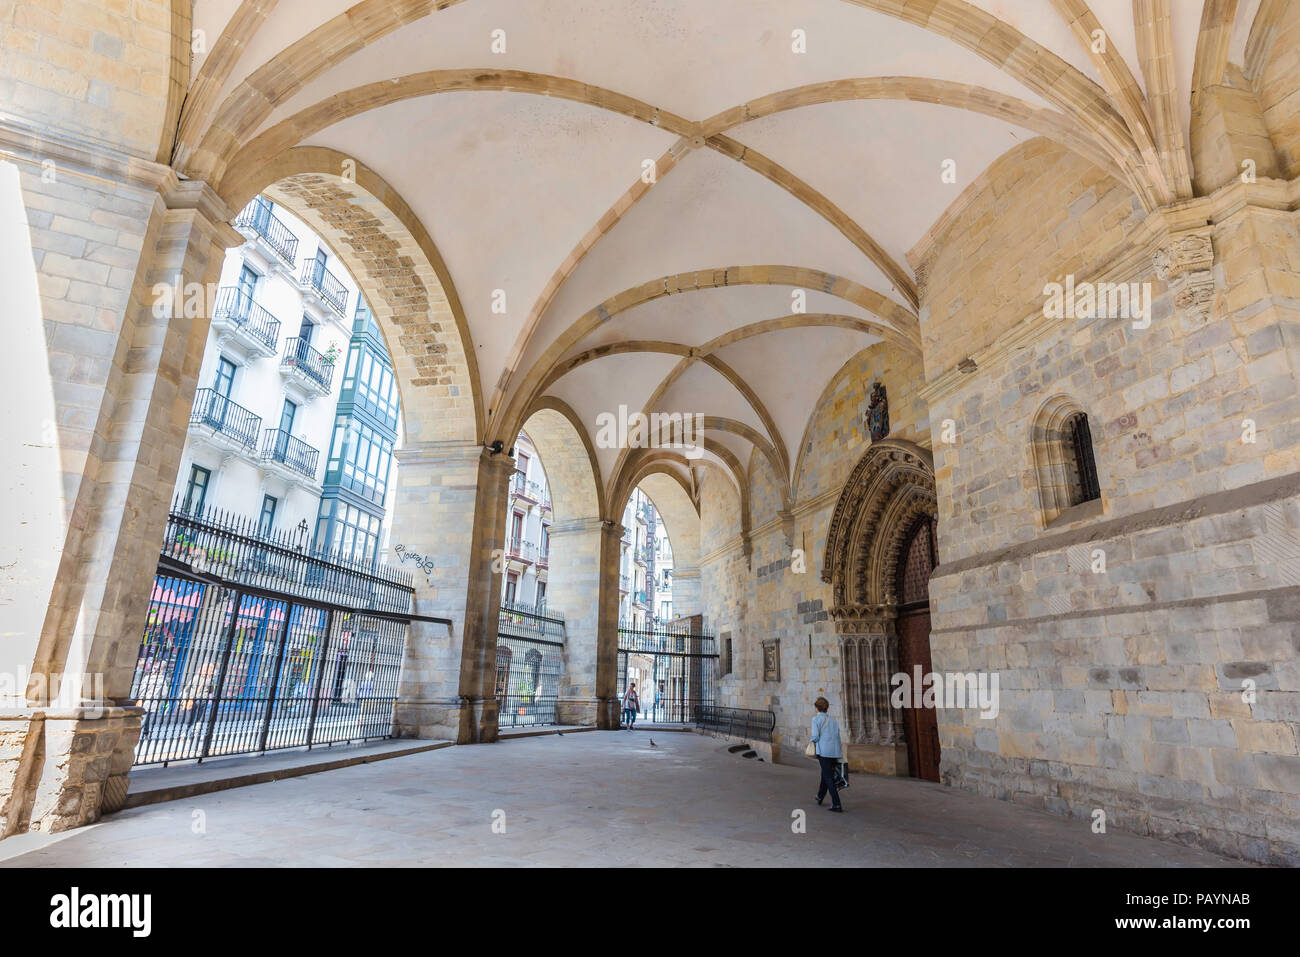 Bilbao Cathedral, view of the vaulted arcade sheltering the east door of the Catedral de Santiago in the Old Town (Campo Viejo) area of Bilbao, Spain. Stock Photo